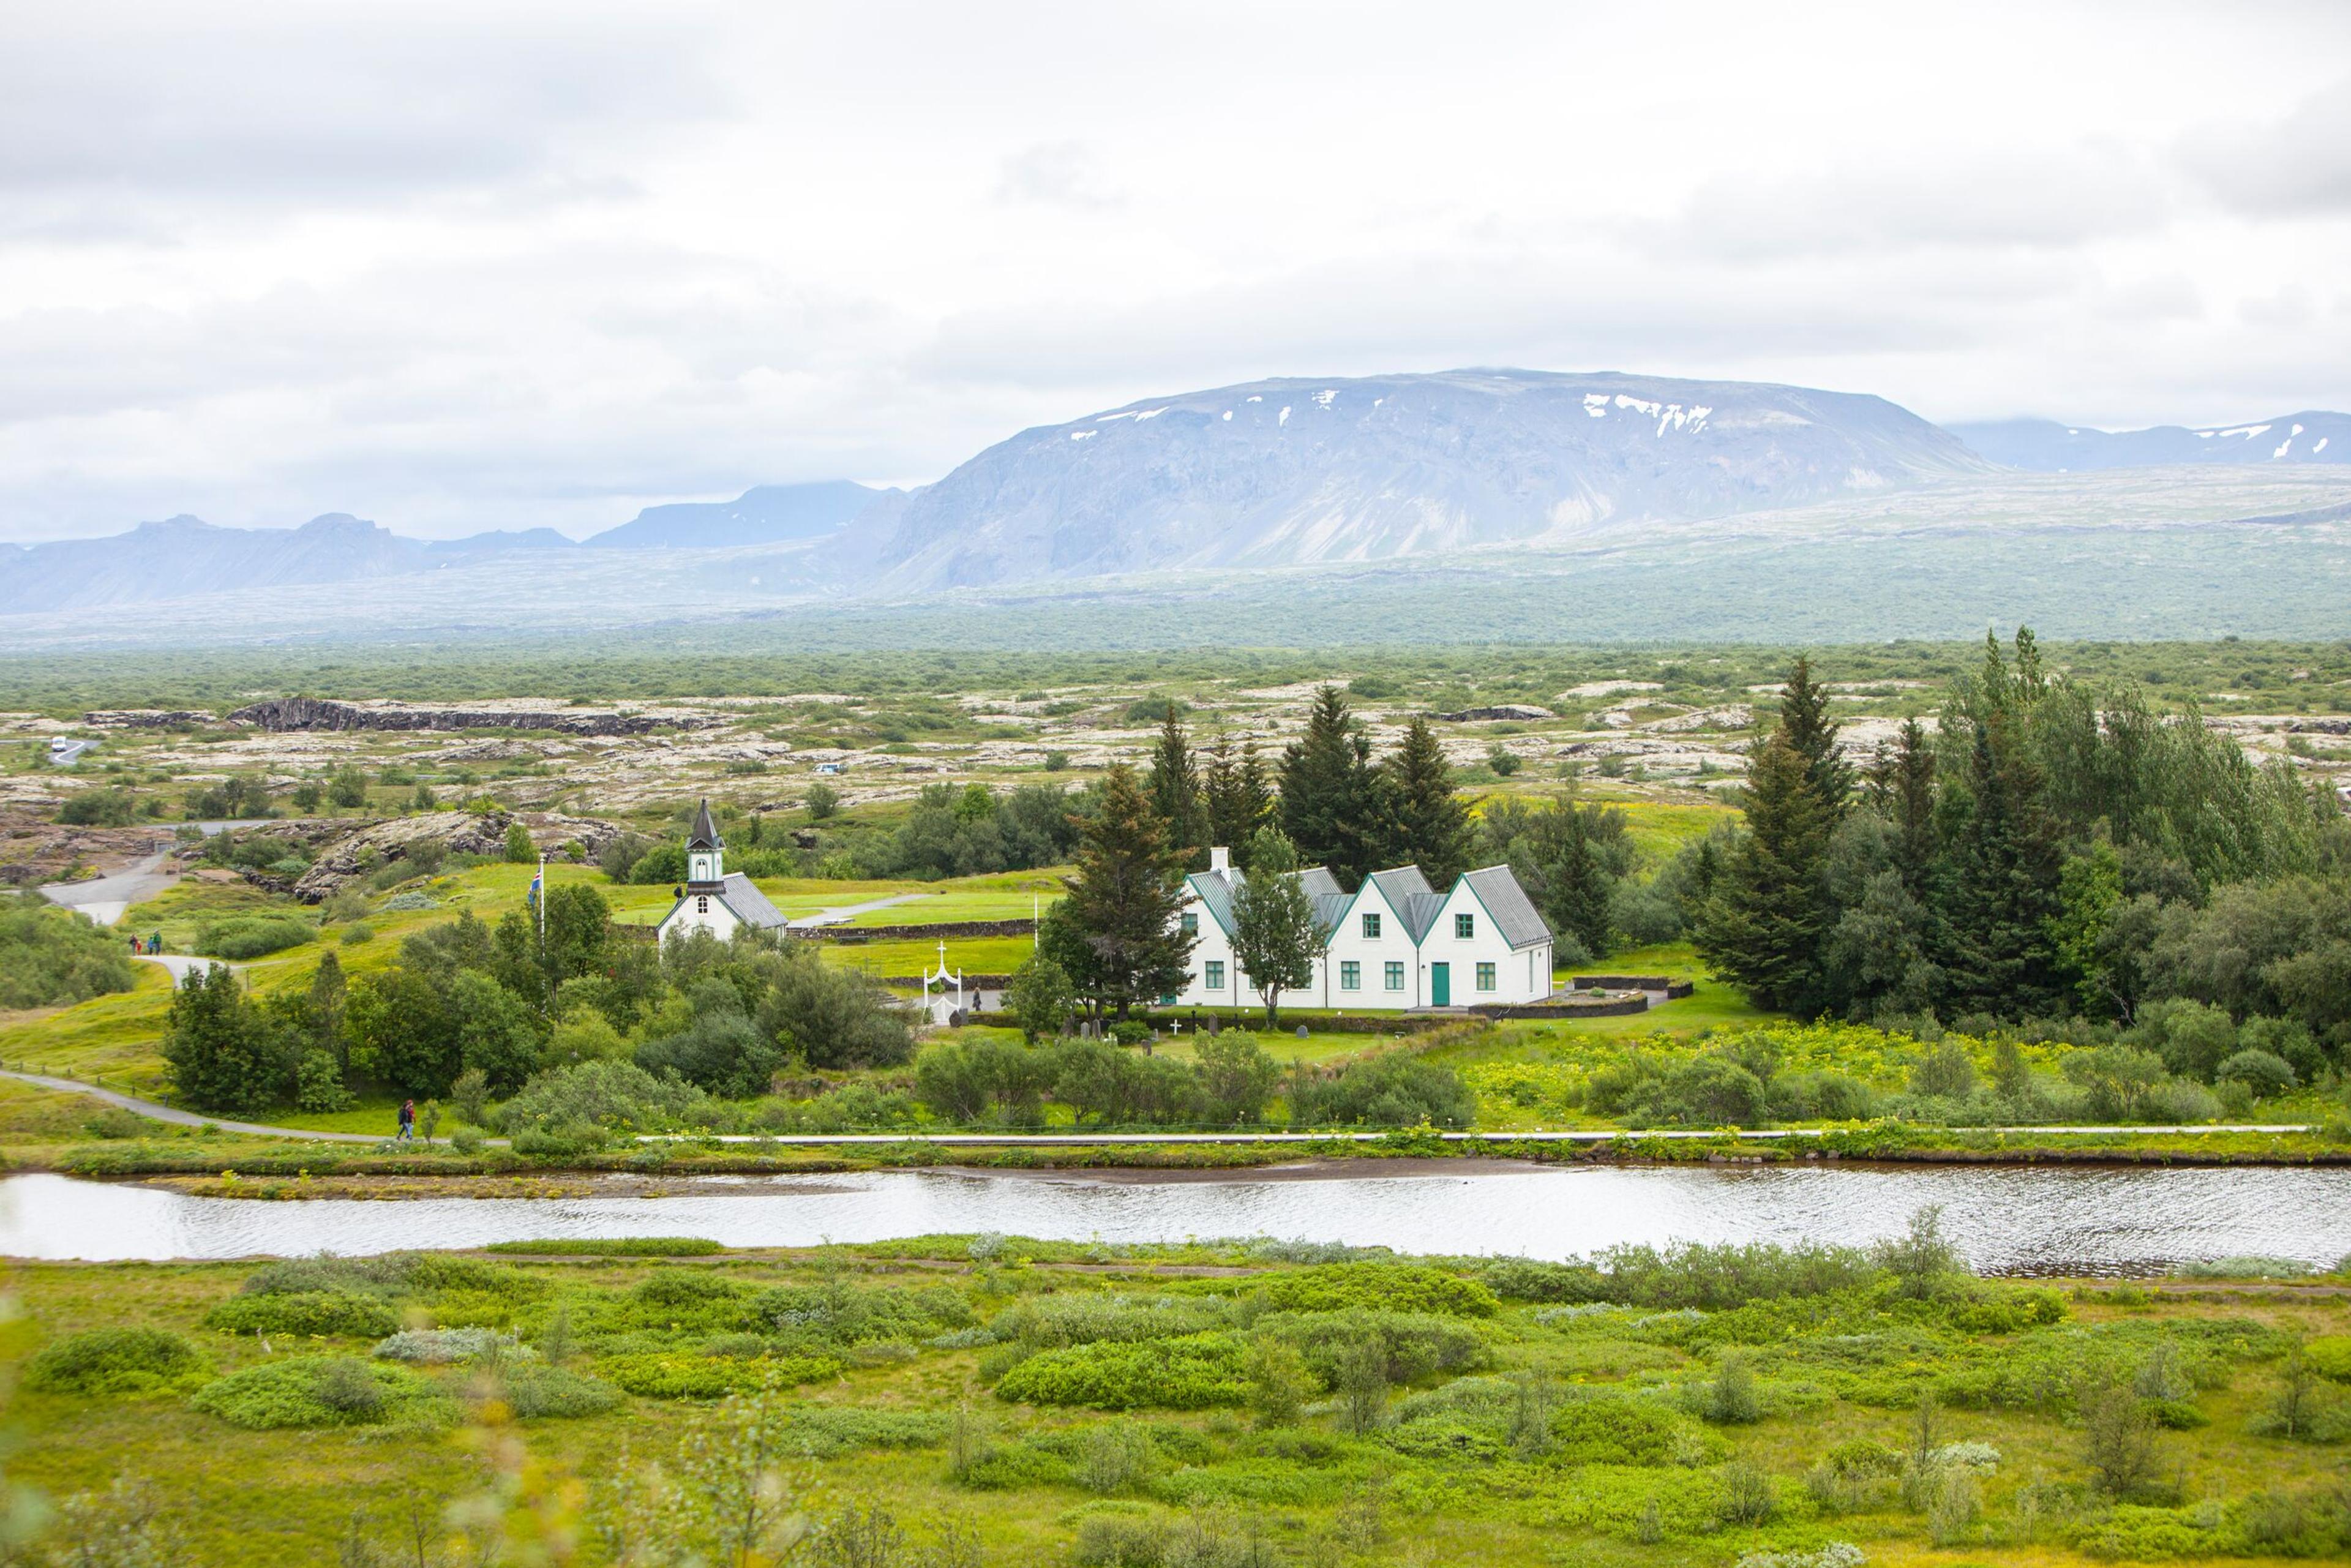 Scenic view of the Thingvellir National Park in the Golden Circle, Iceland, featuring a cluster of traditional white houses with green roofs, a church, and a reflective pond surrounded by lush greenery with distant mountains under a cloudy sky